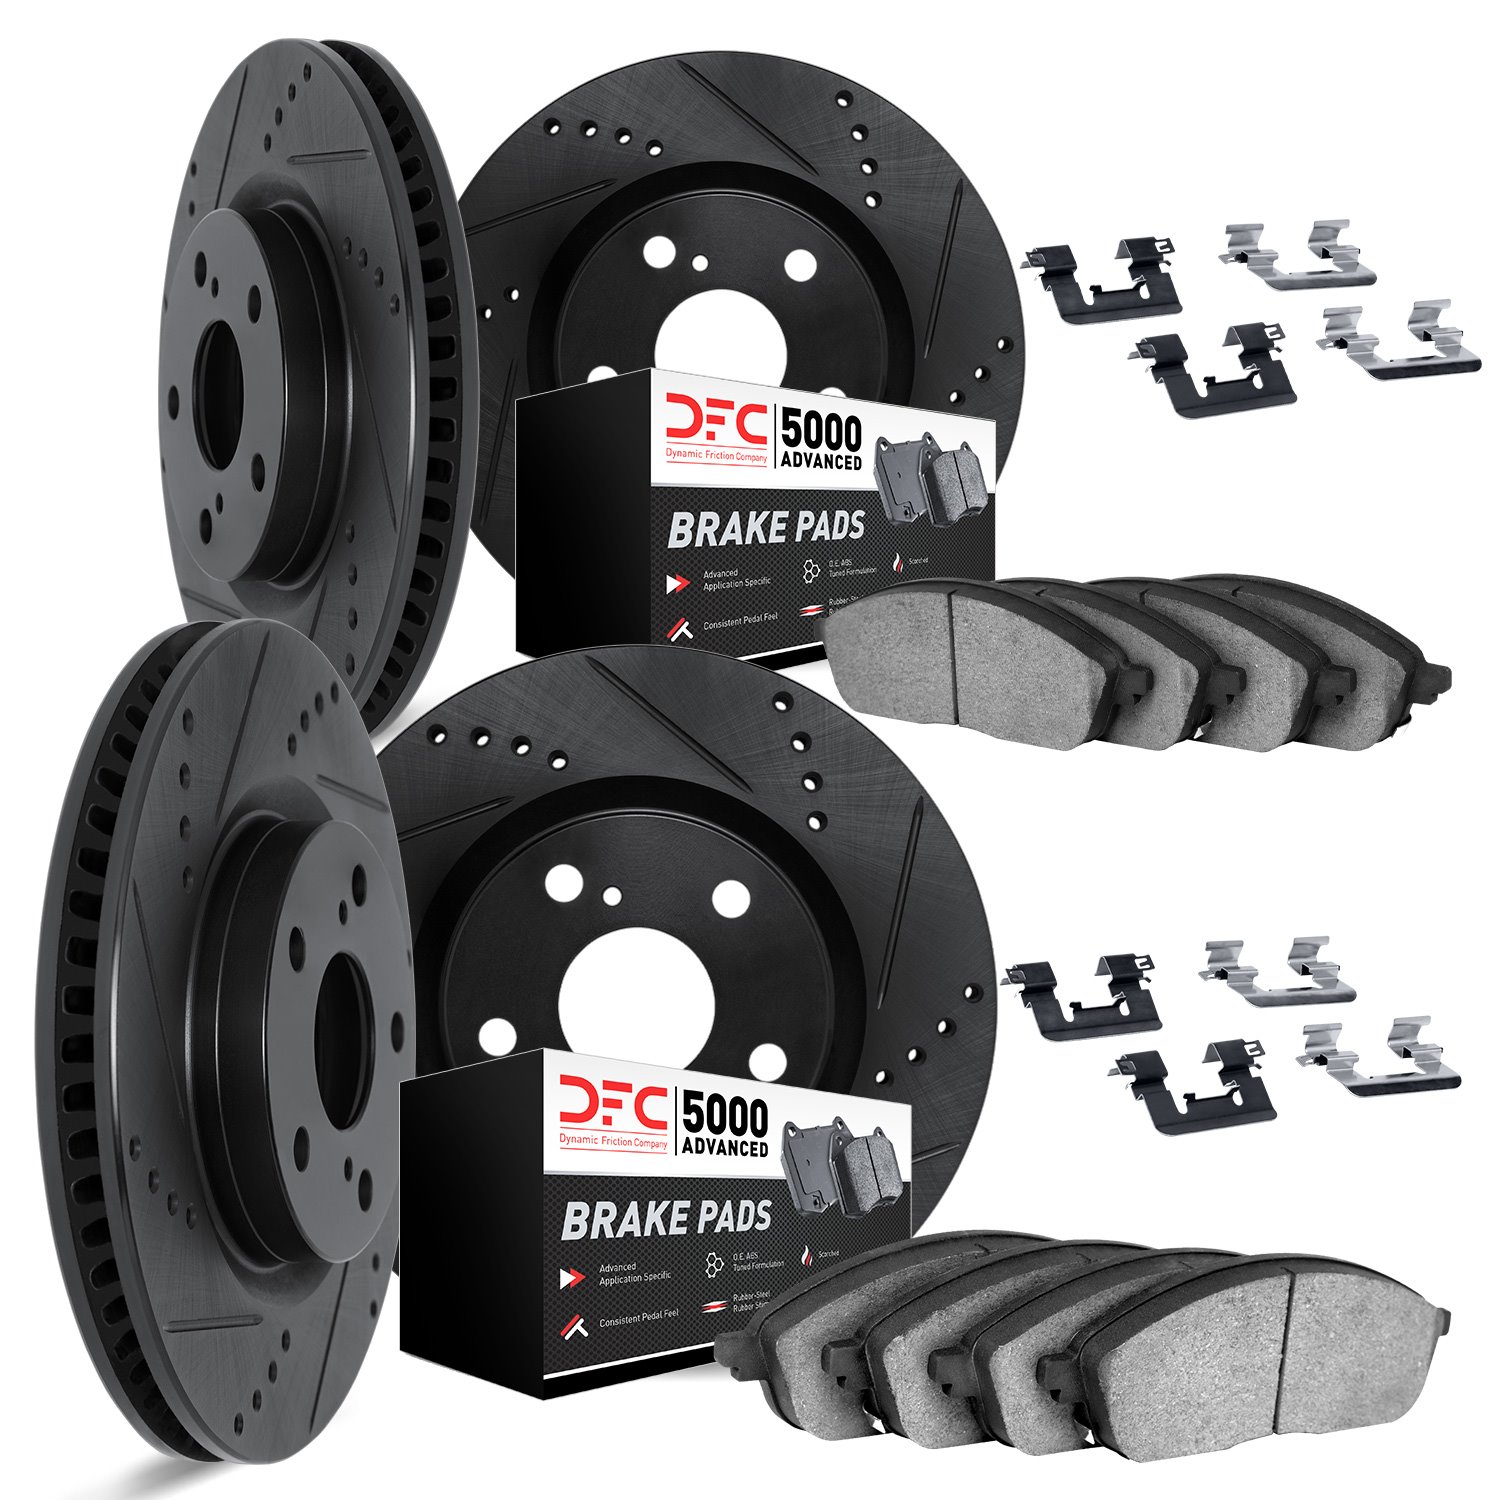 8514-31067 Drilled/Slotted Brake Rotors w/5000 Advanced Brake Pads Kit & Hardware [Black], 2007-2013 BMW, Position: Front and Re